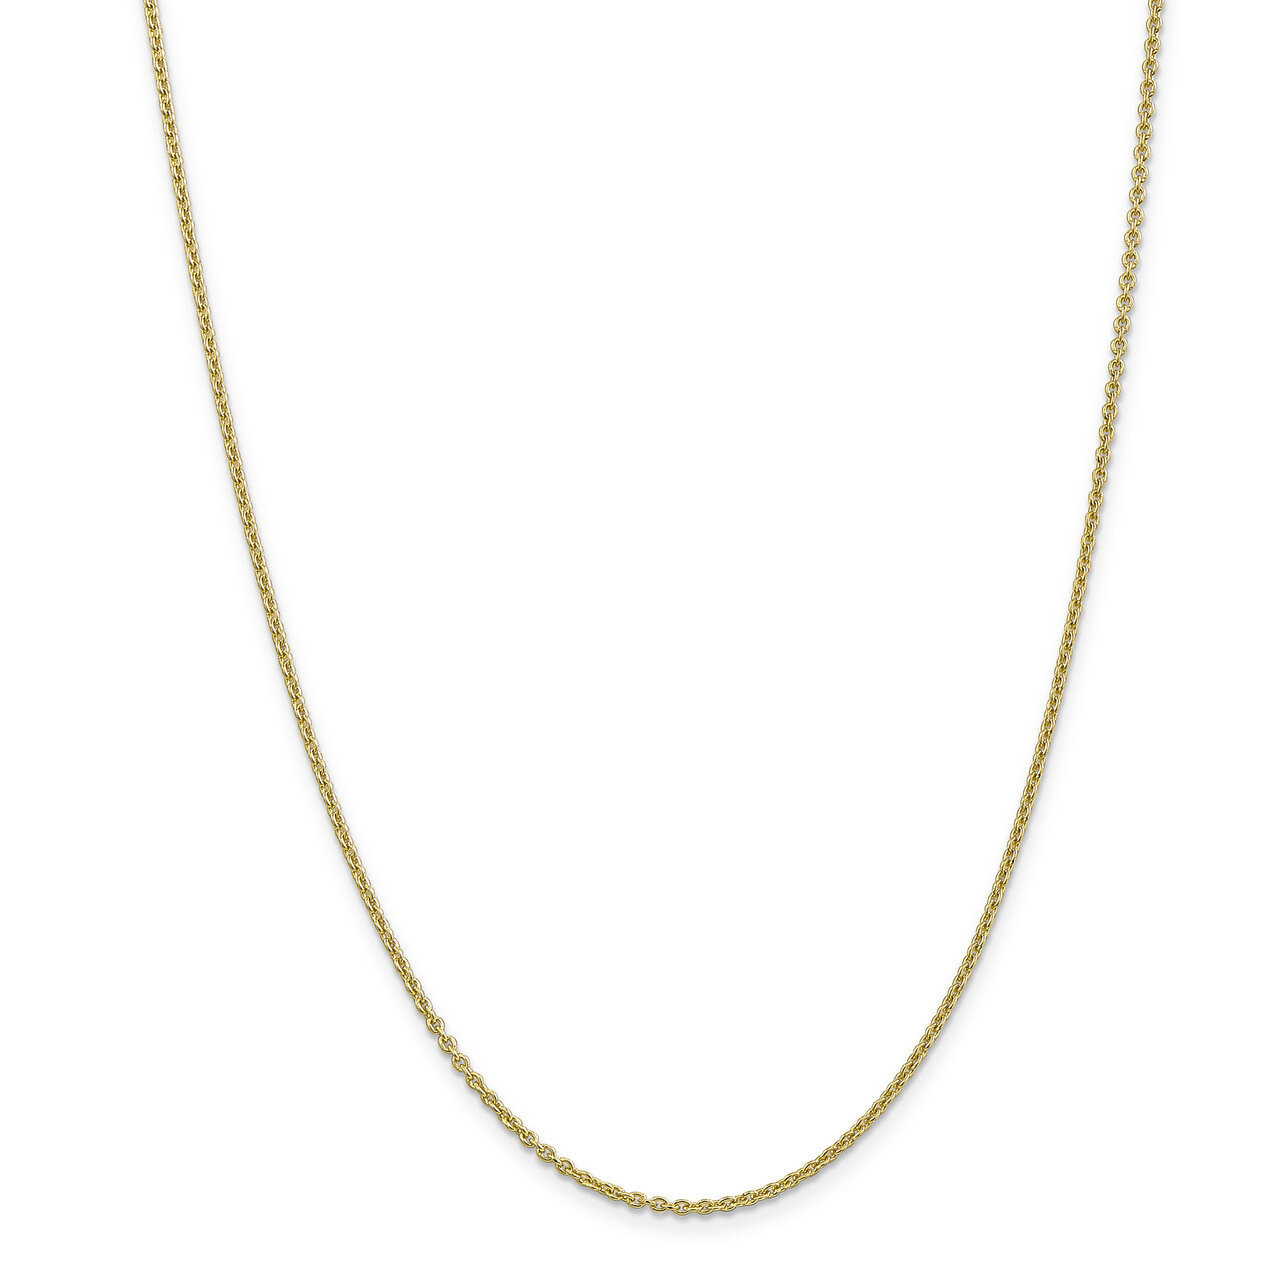 20 Inch 2mm Solid Polished Cable Chain 10k Gold 10PE138-20